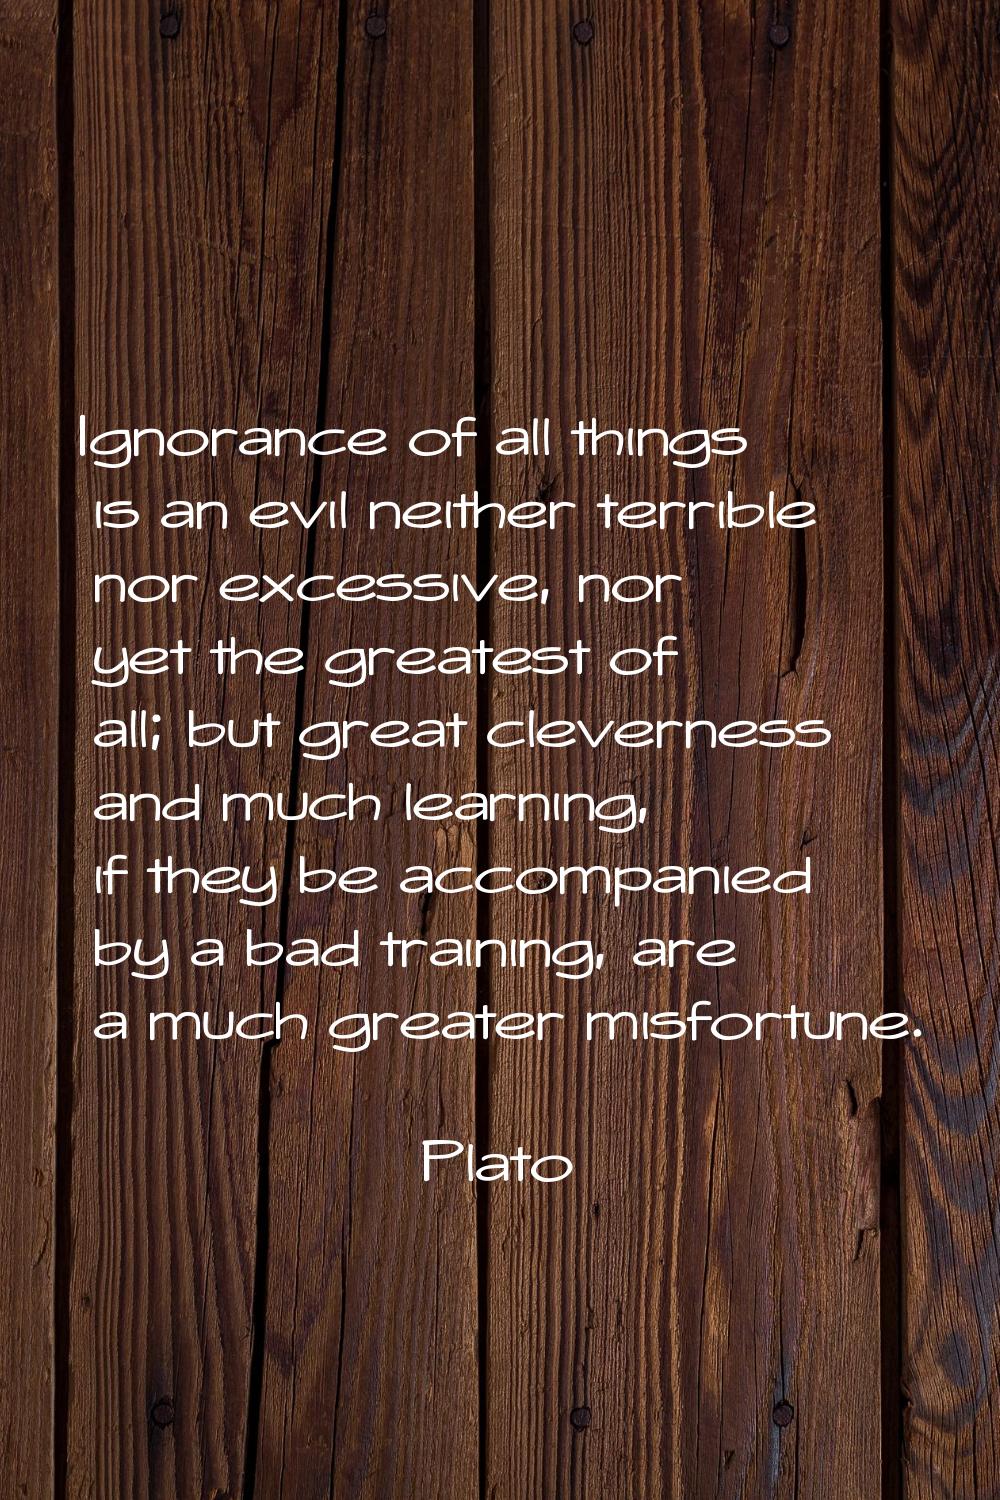 Ignorance of all things is an evil neither terrible nor excessive, nor yet the greatest of all; but